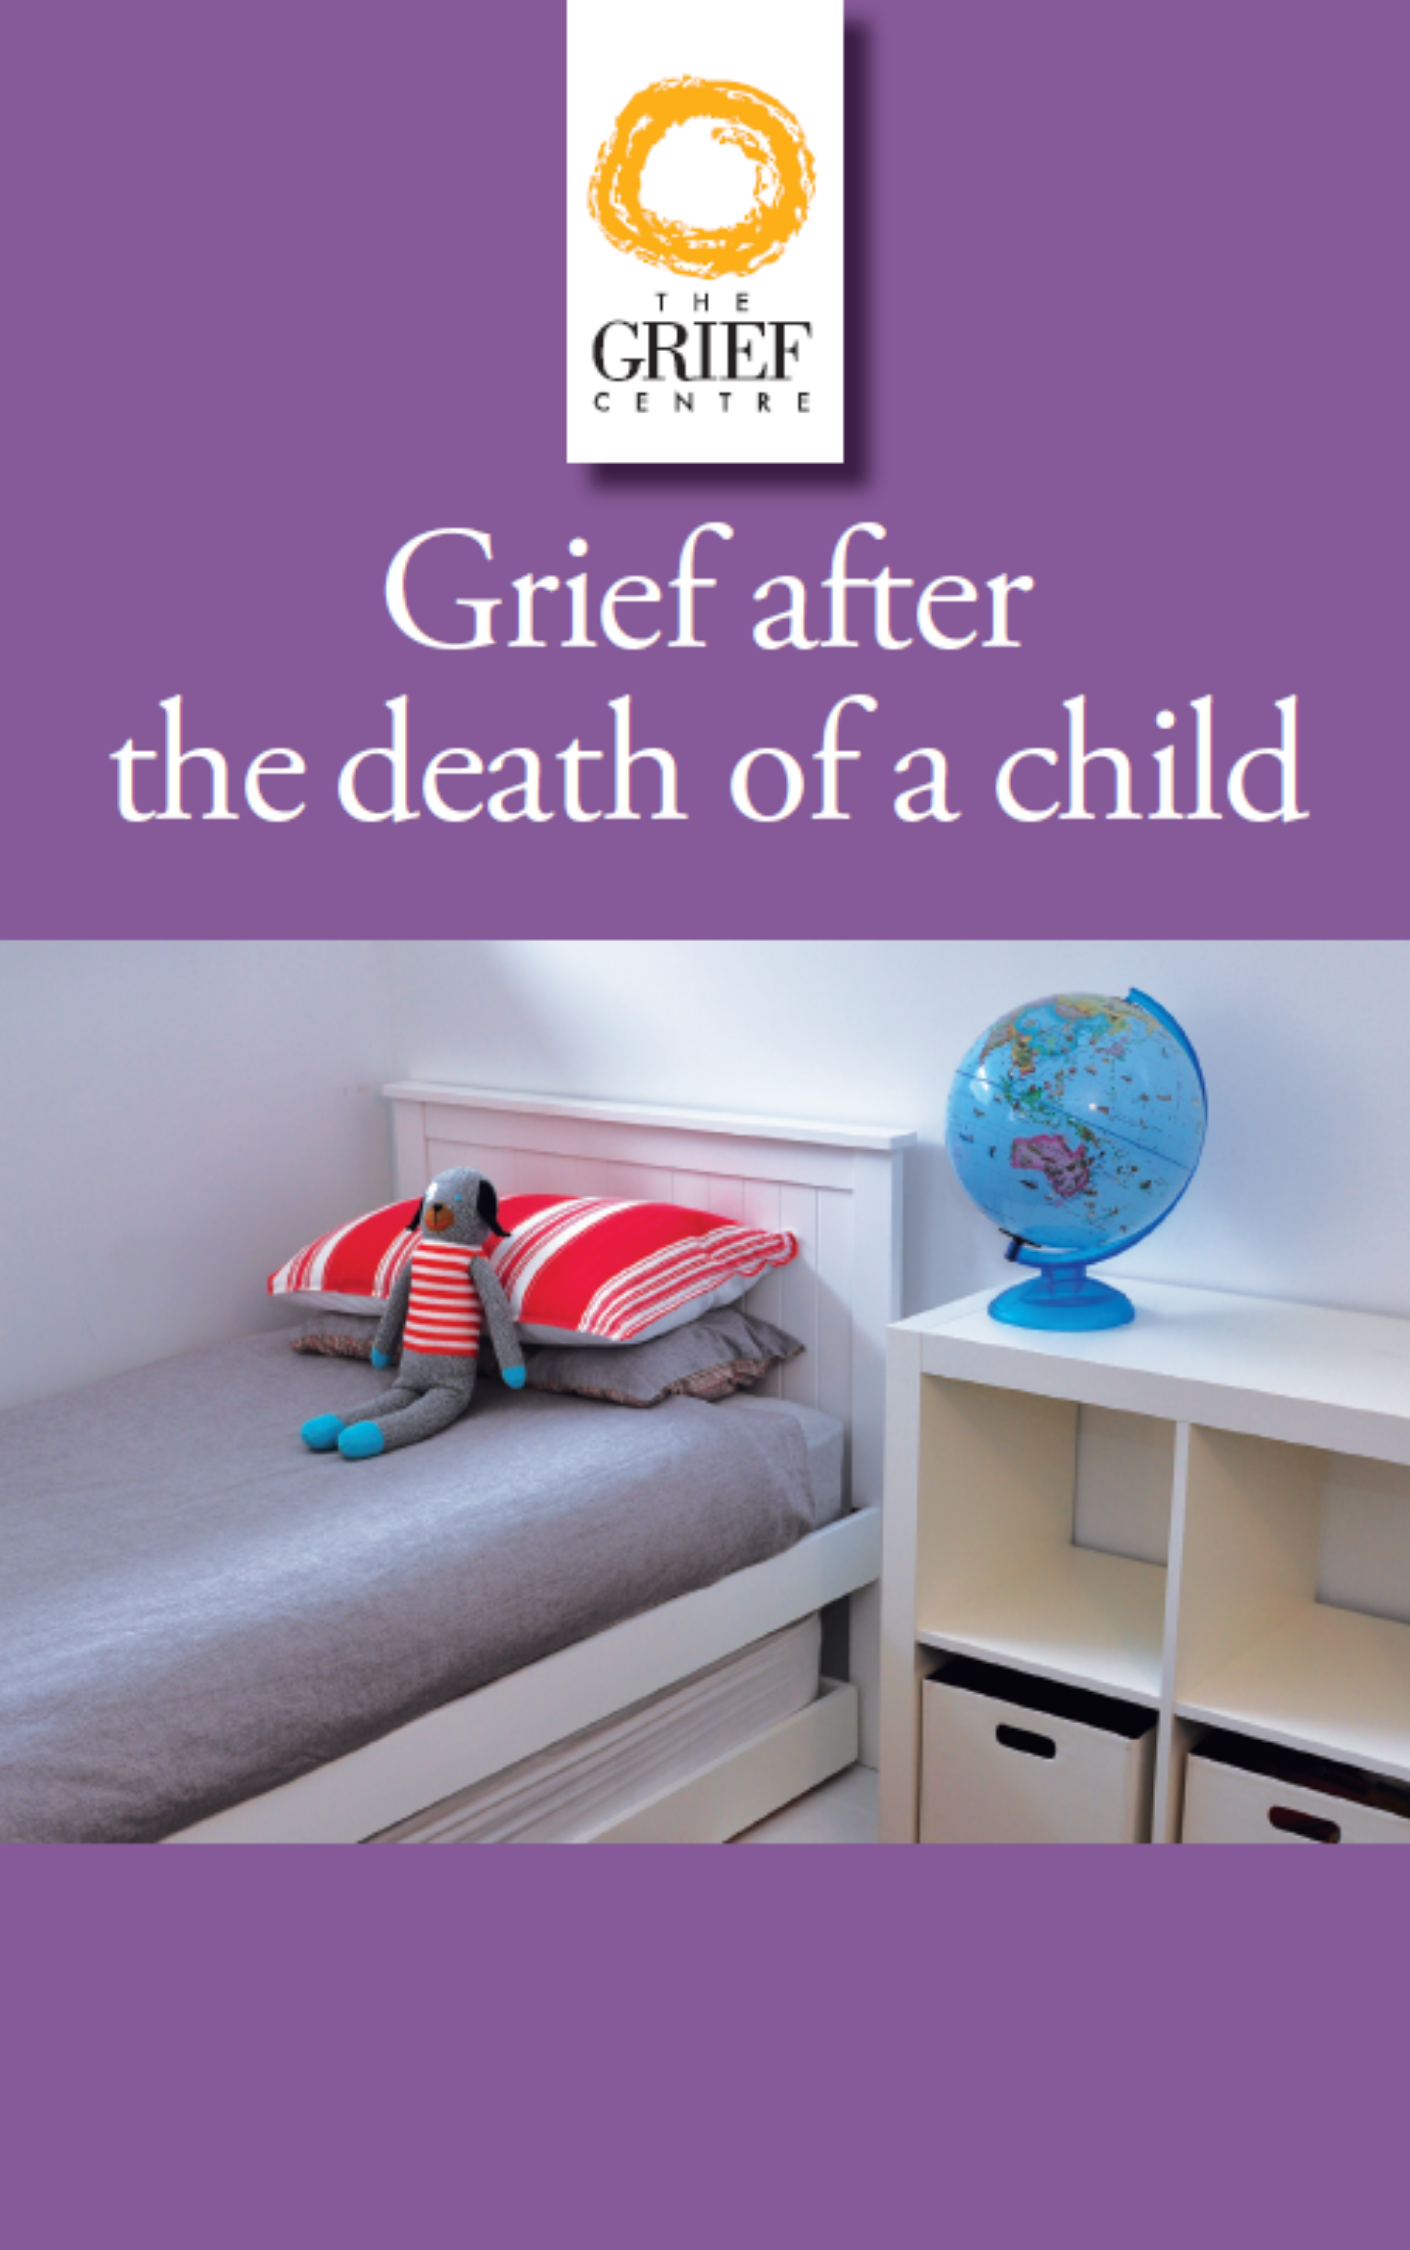 Grief After the Death of a Child Booklet